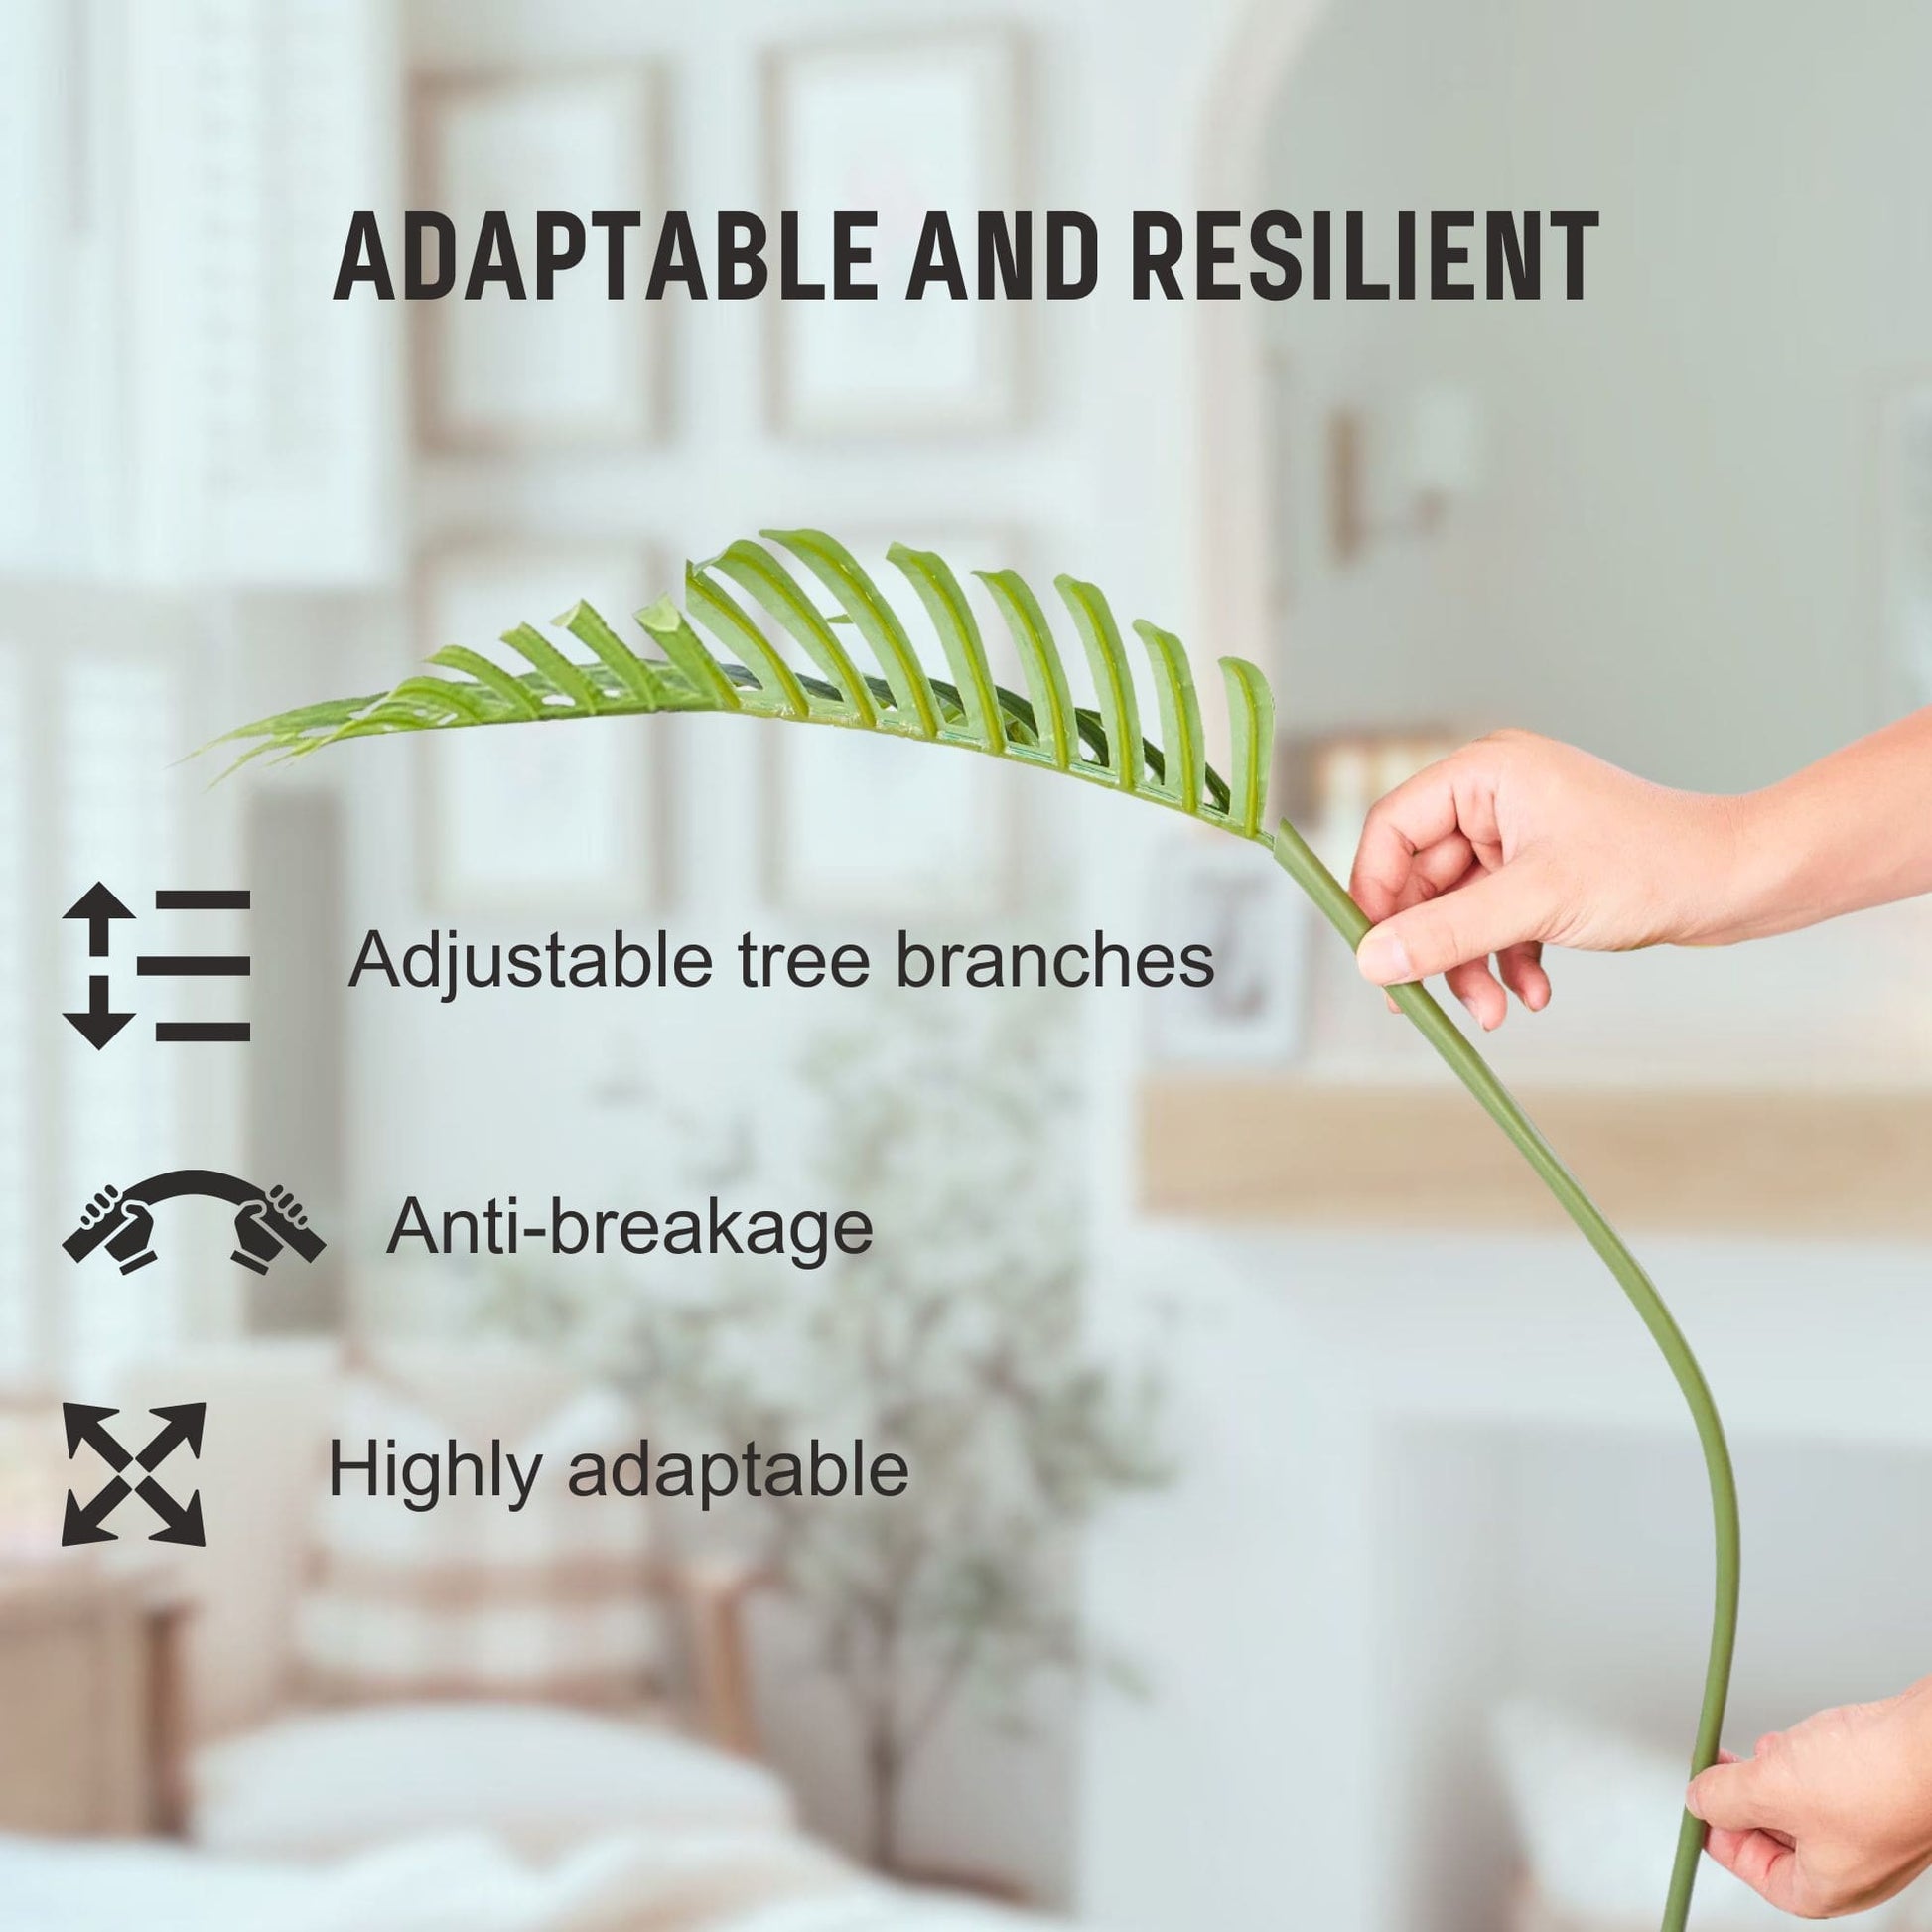 Flexible and durable artificial palm tree branches that can be easily shaped for any space